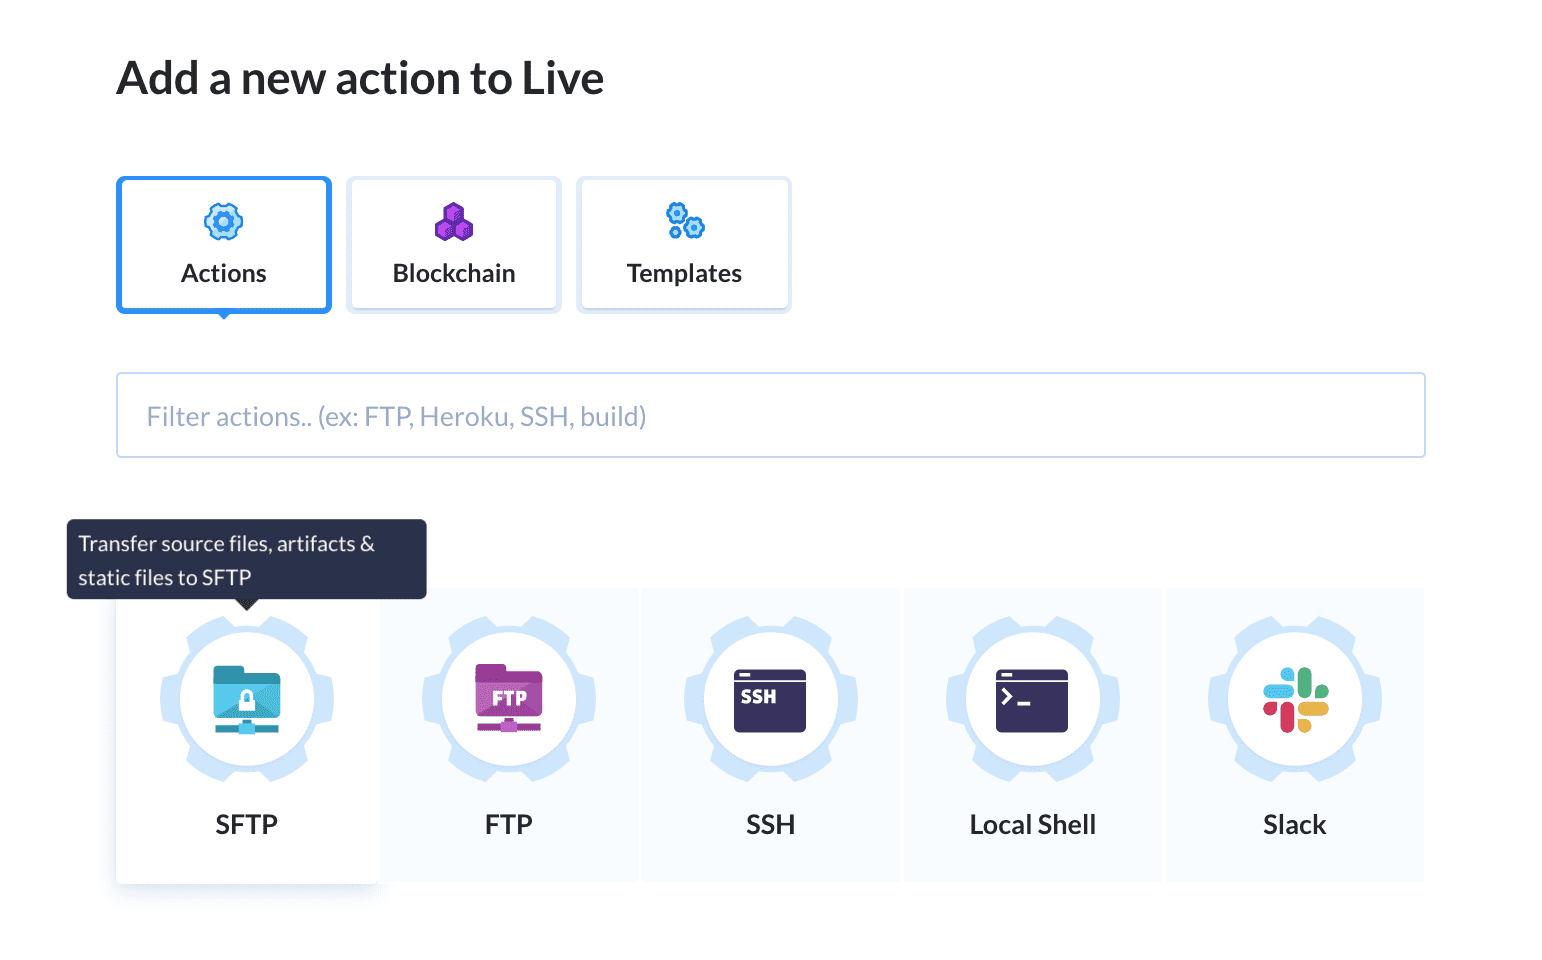 Selecting the upload action